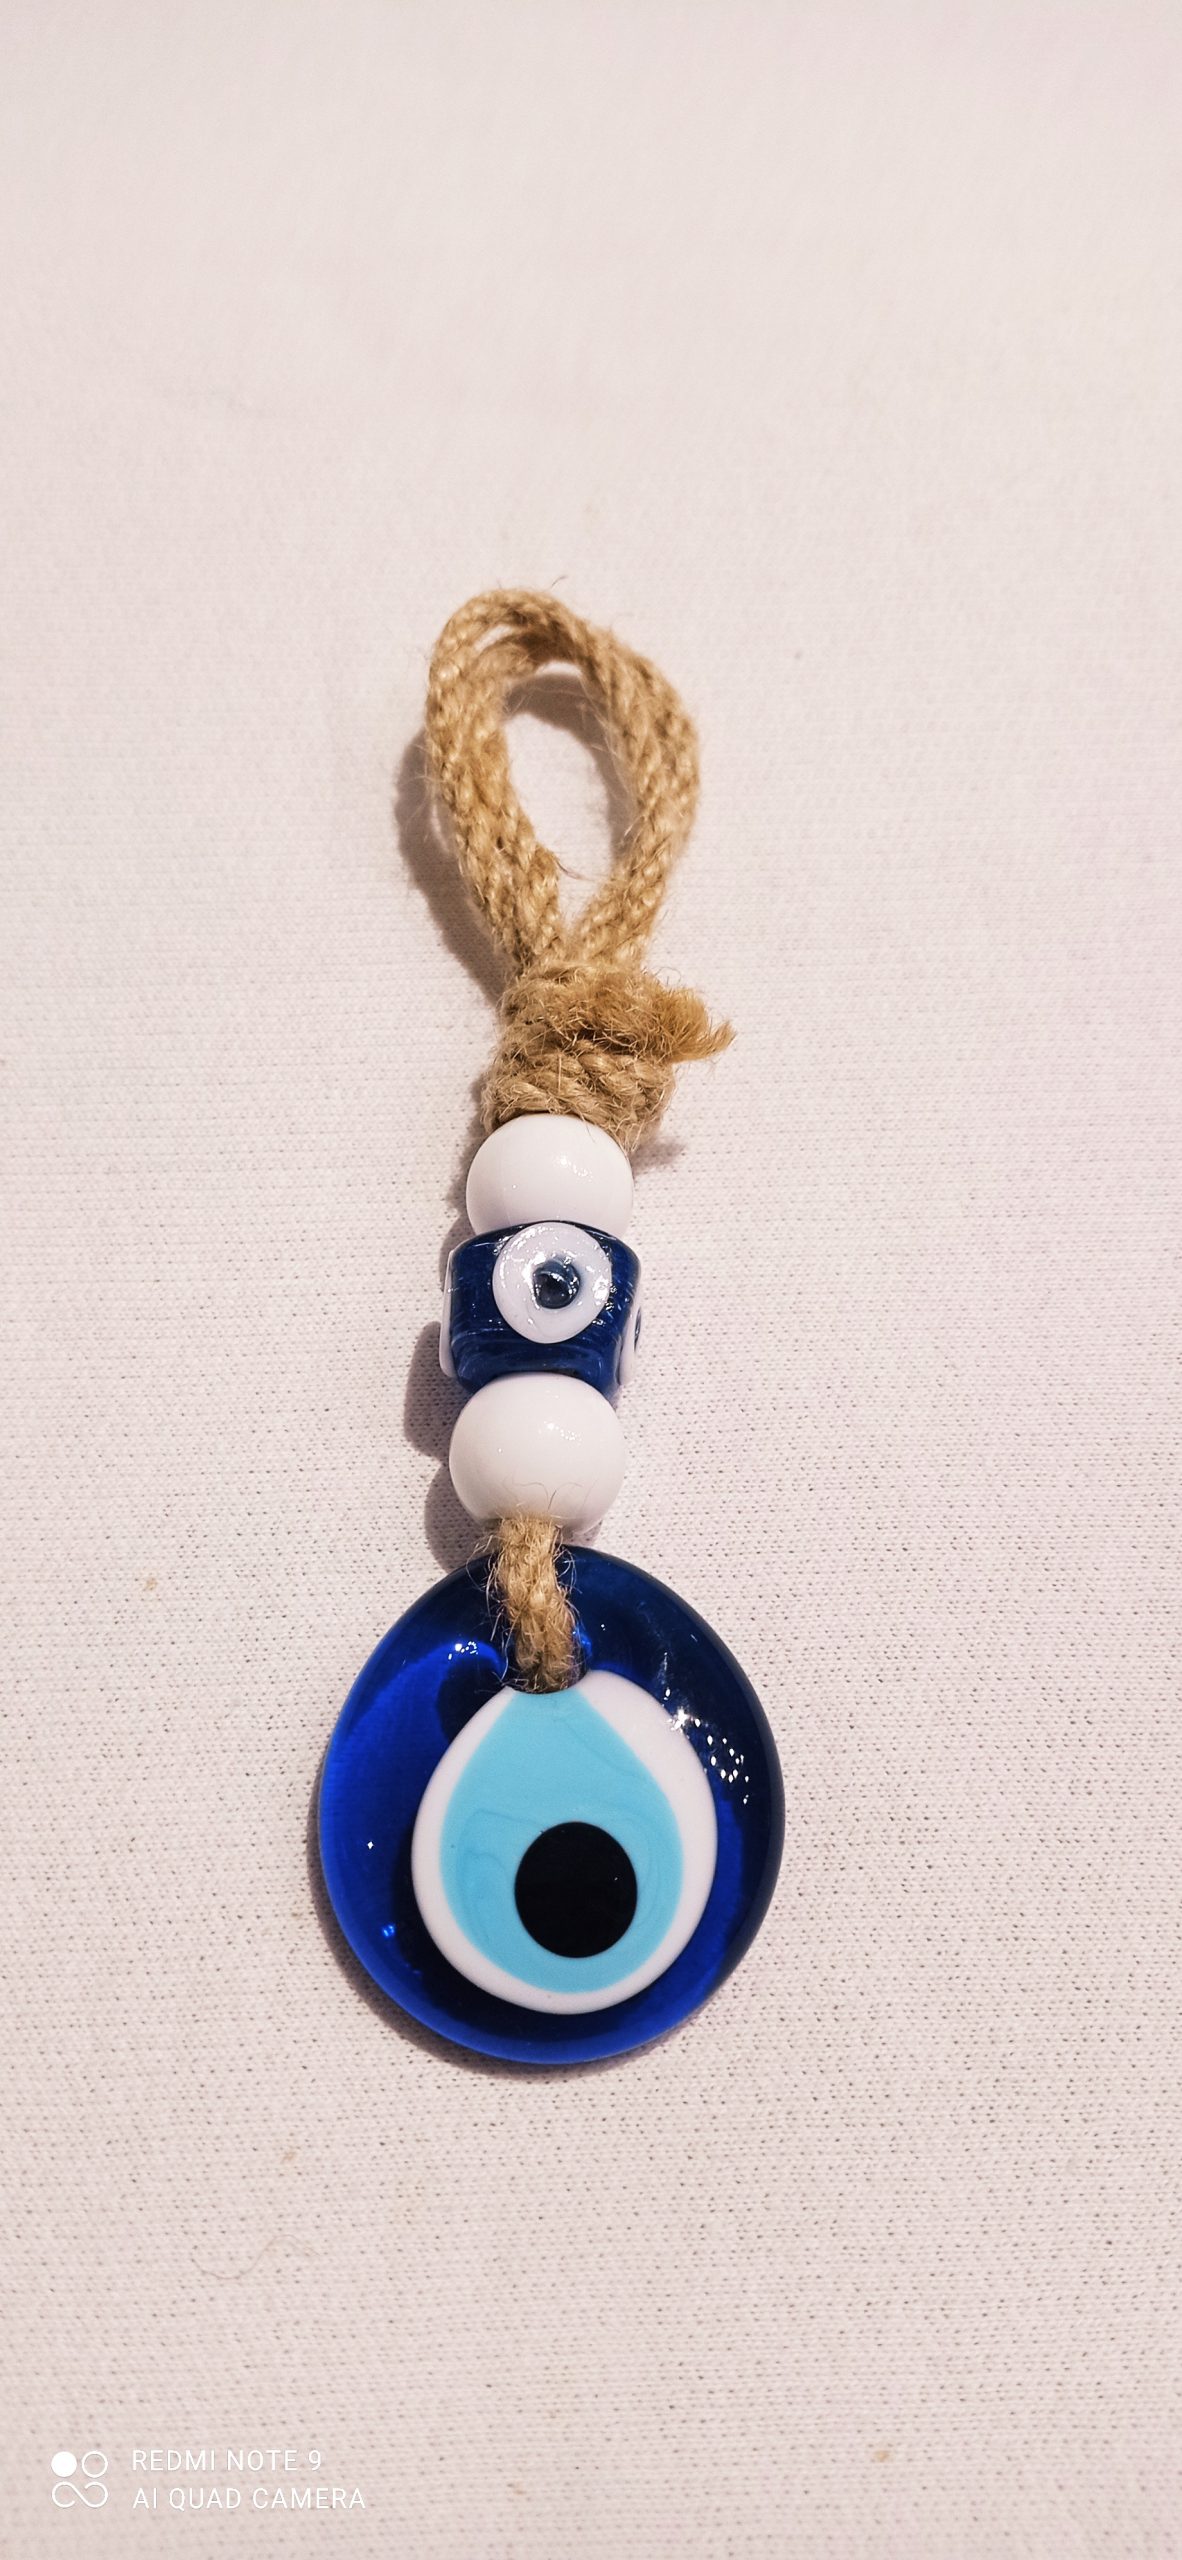 Evil Eye Accessories #5156 LuckyEye Braided Rope Heart Hanging Home Decoration